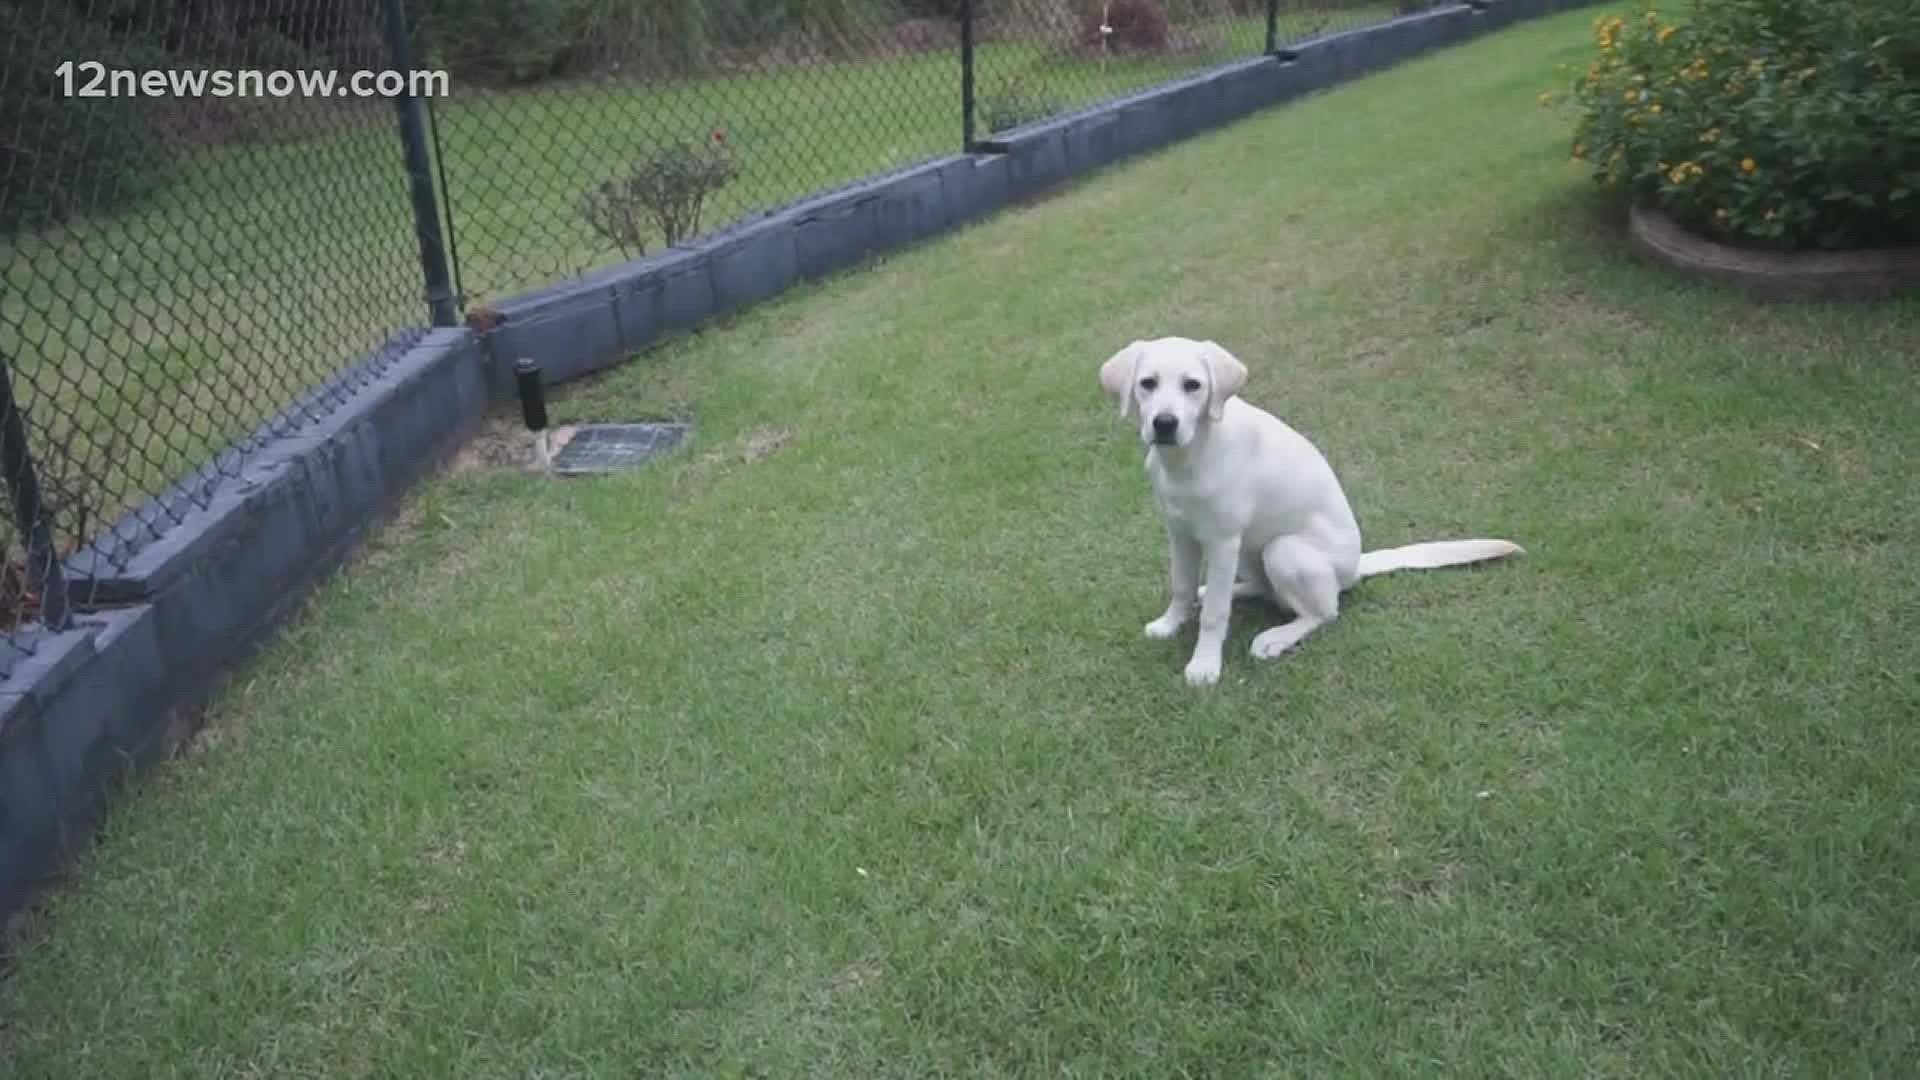 The white Labrador is 4 months old.